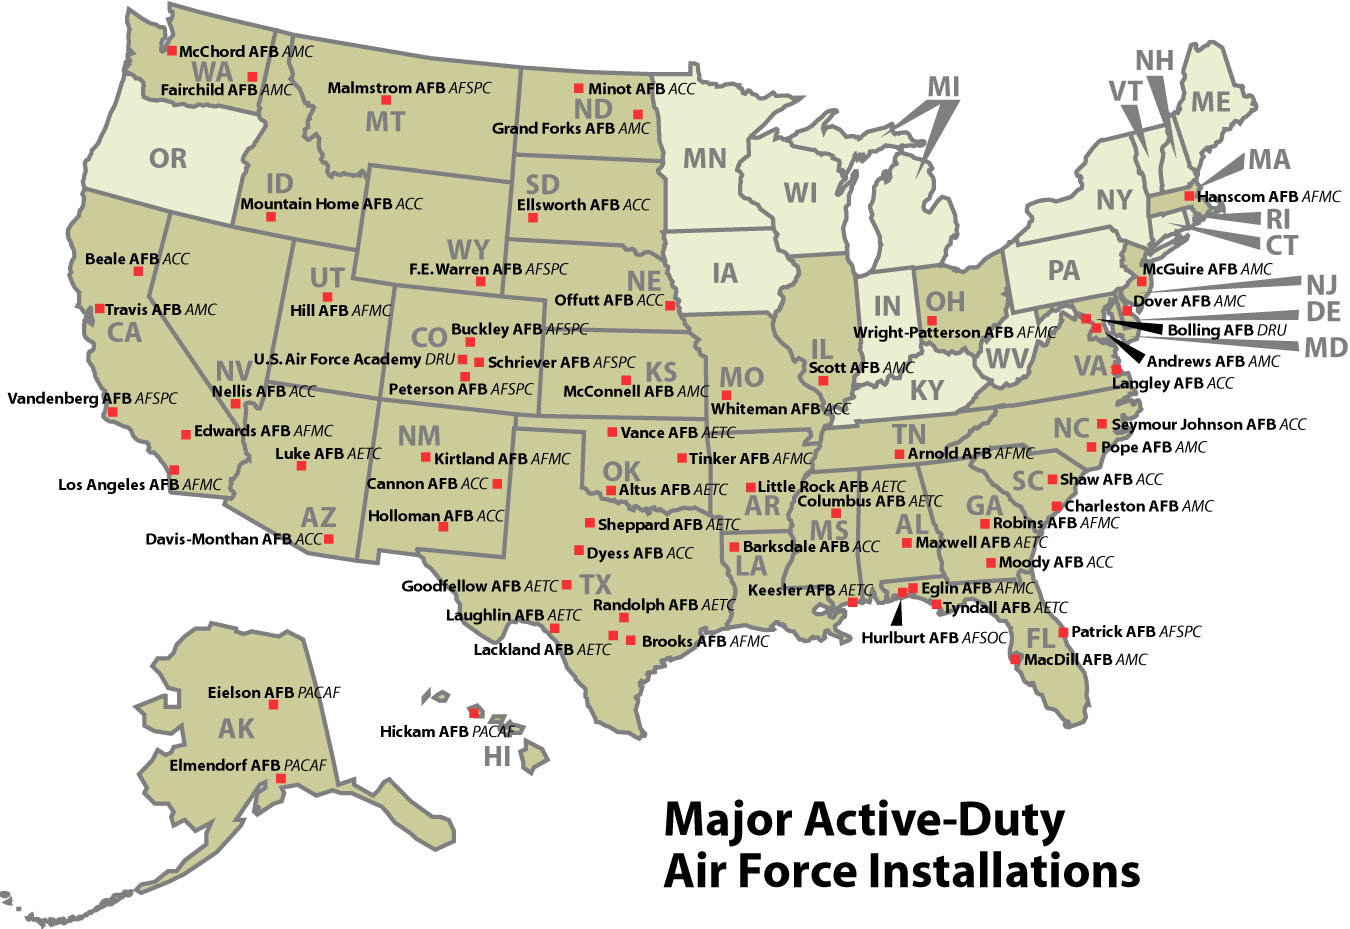 Major Air Force Installations